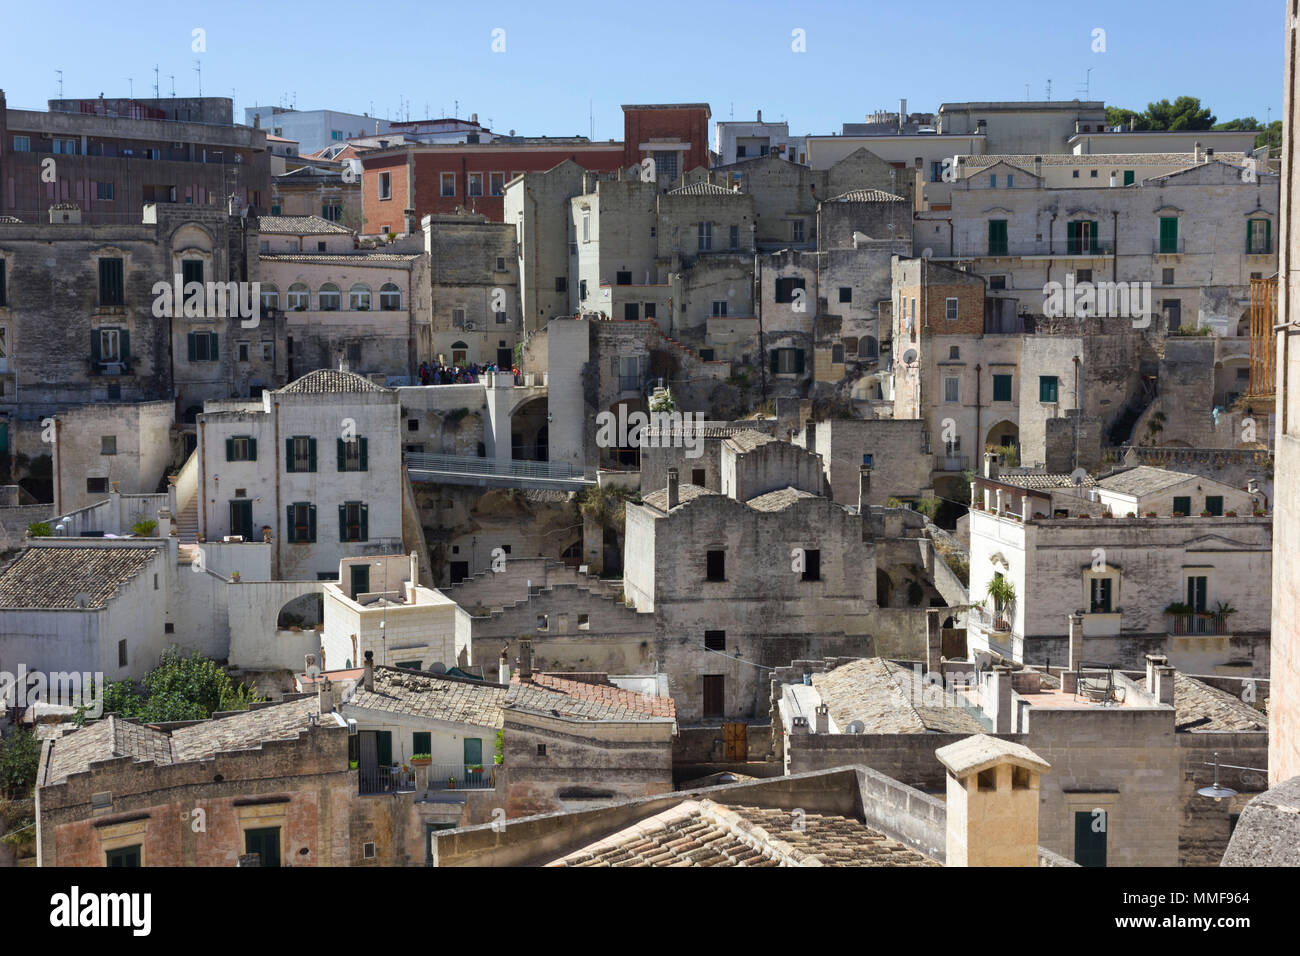 MATERA, ITALY - AUGUST 25 2017: Matera ancient rupestrian houses in city center Stock Photo